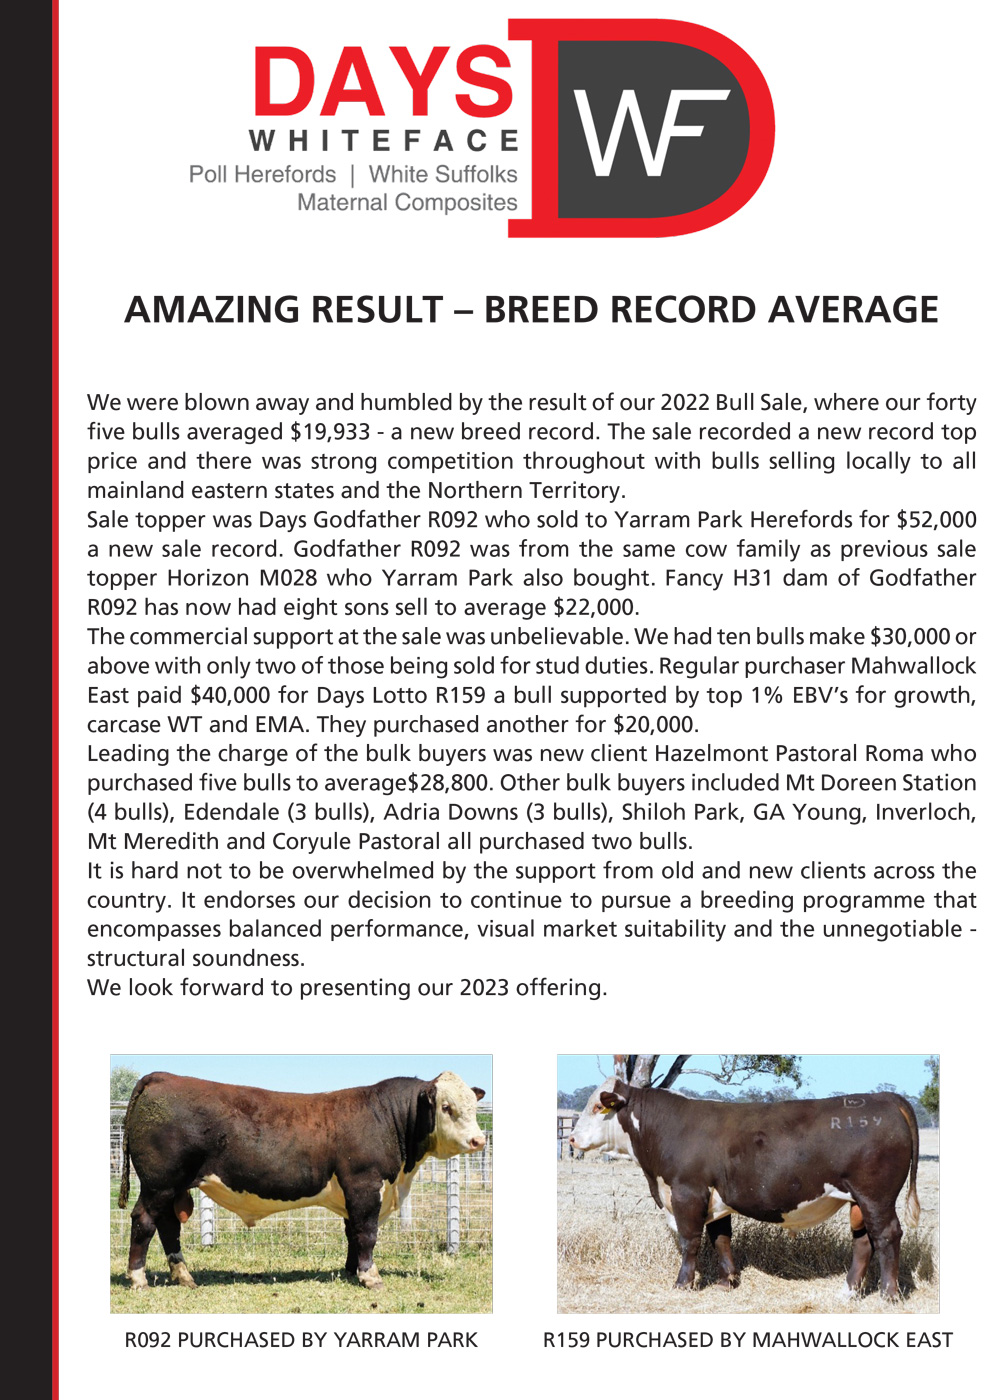 Days Whiteface Cattle Update 2022